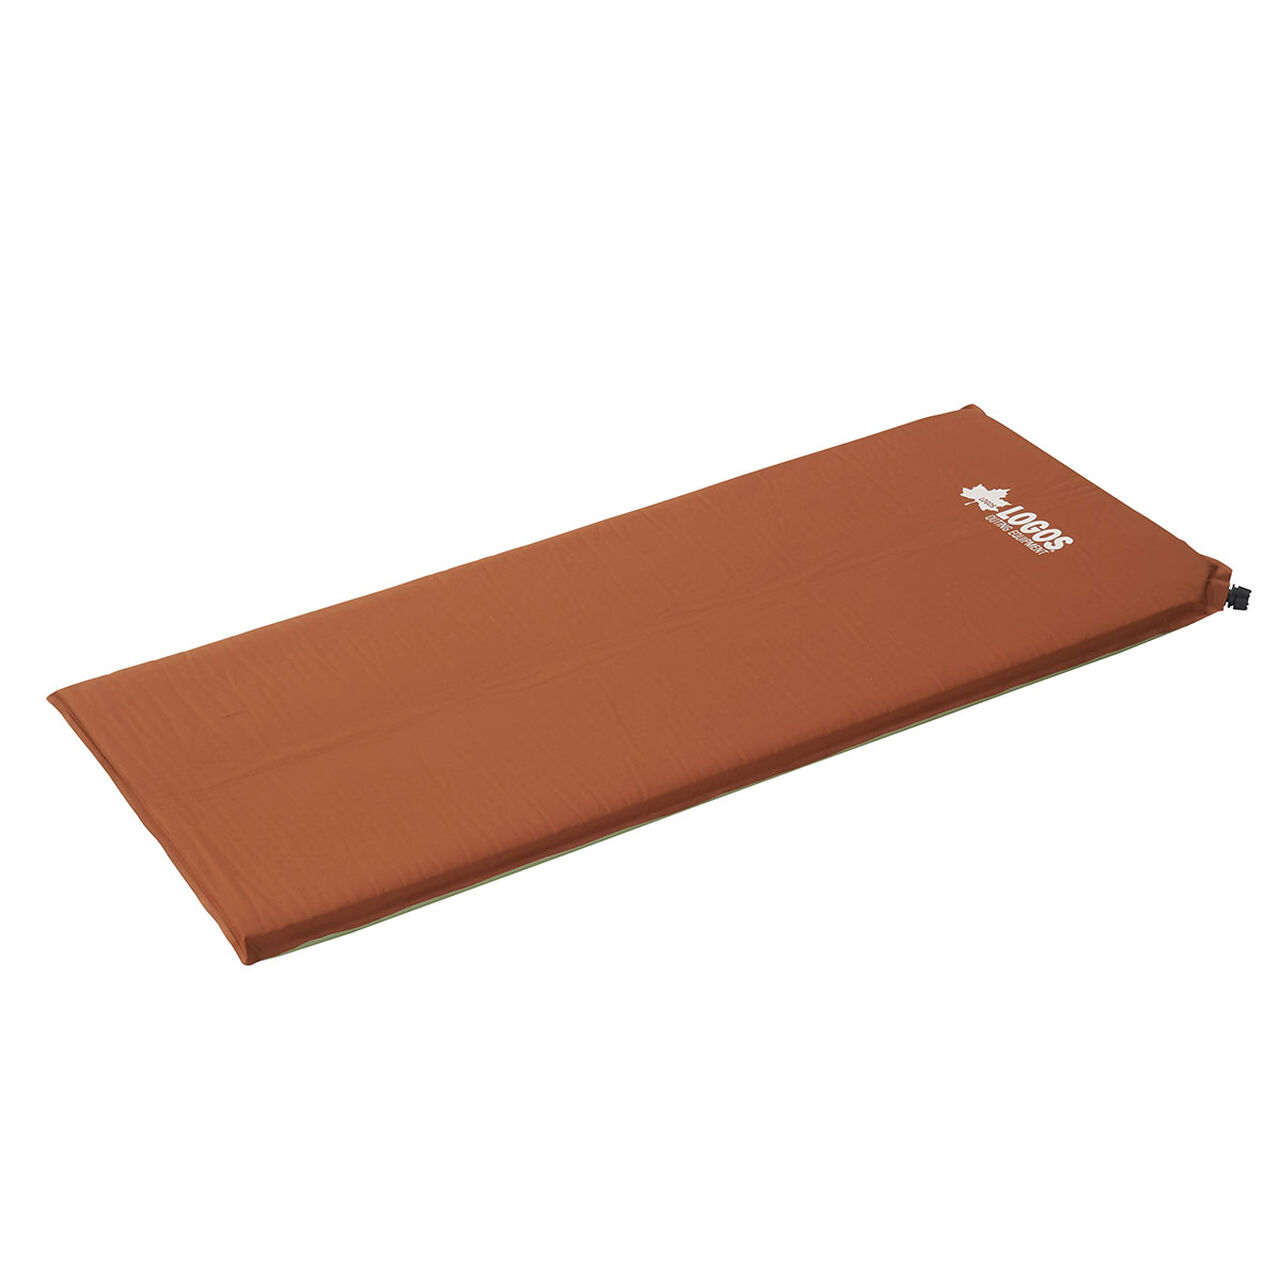 (High Density Foam) 40 Compact Self-inflating Mat - SOLO,, large image number 2